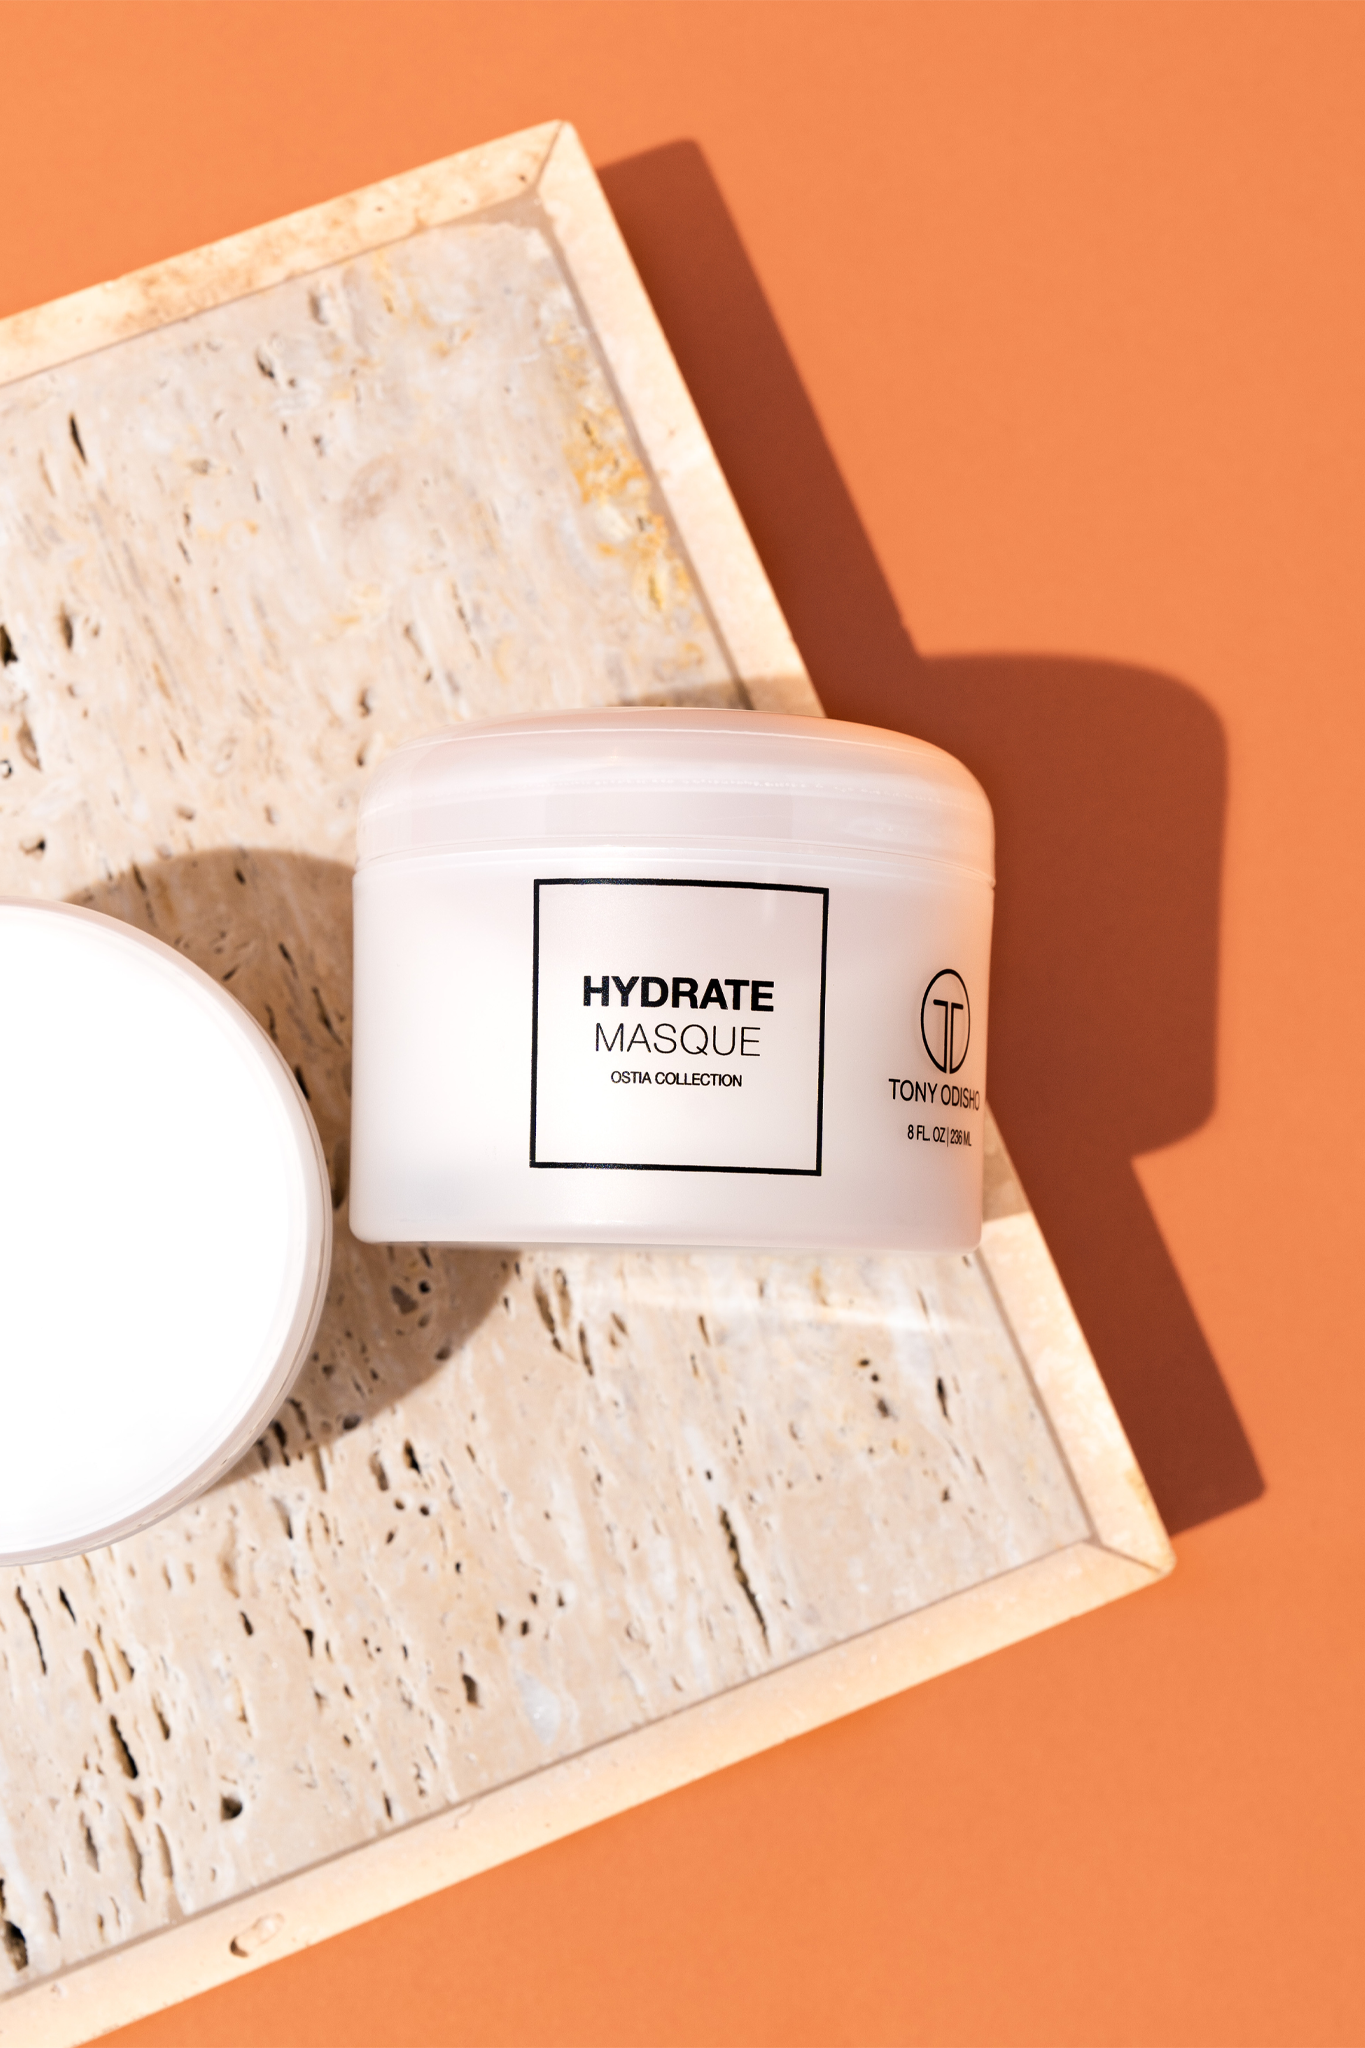 Hydrate Masque - Image 1